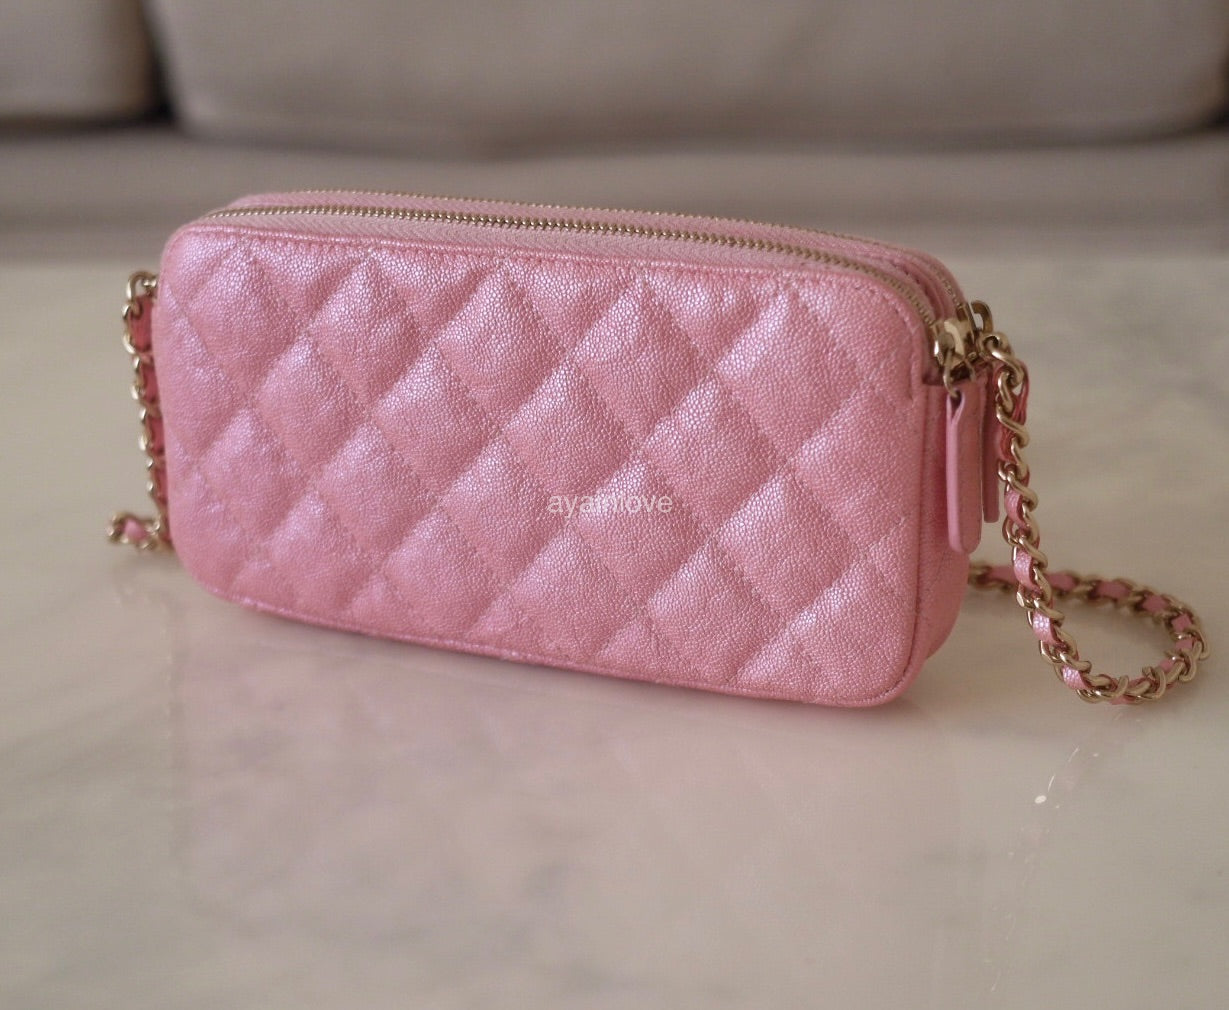 CHANEL 19S Iridescent Pink Caviar Phone Clutch on Chain Detachable